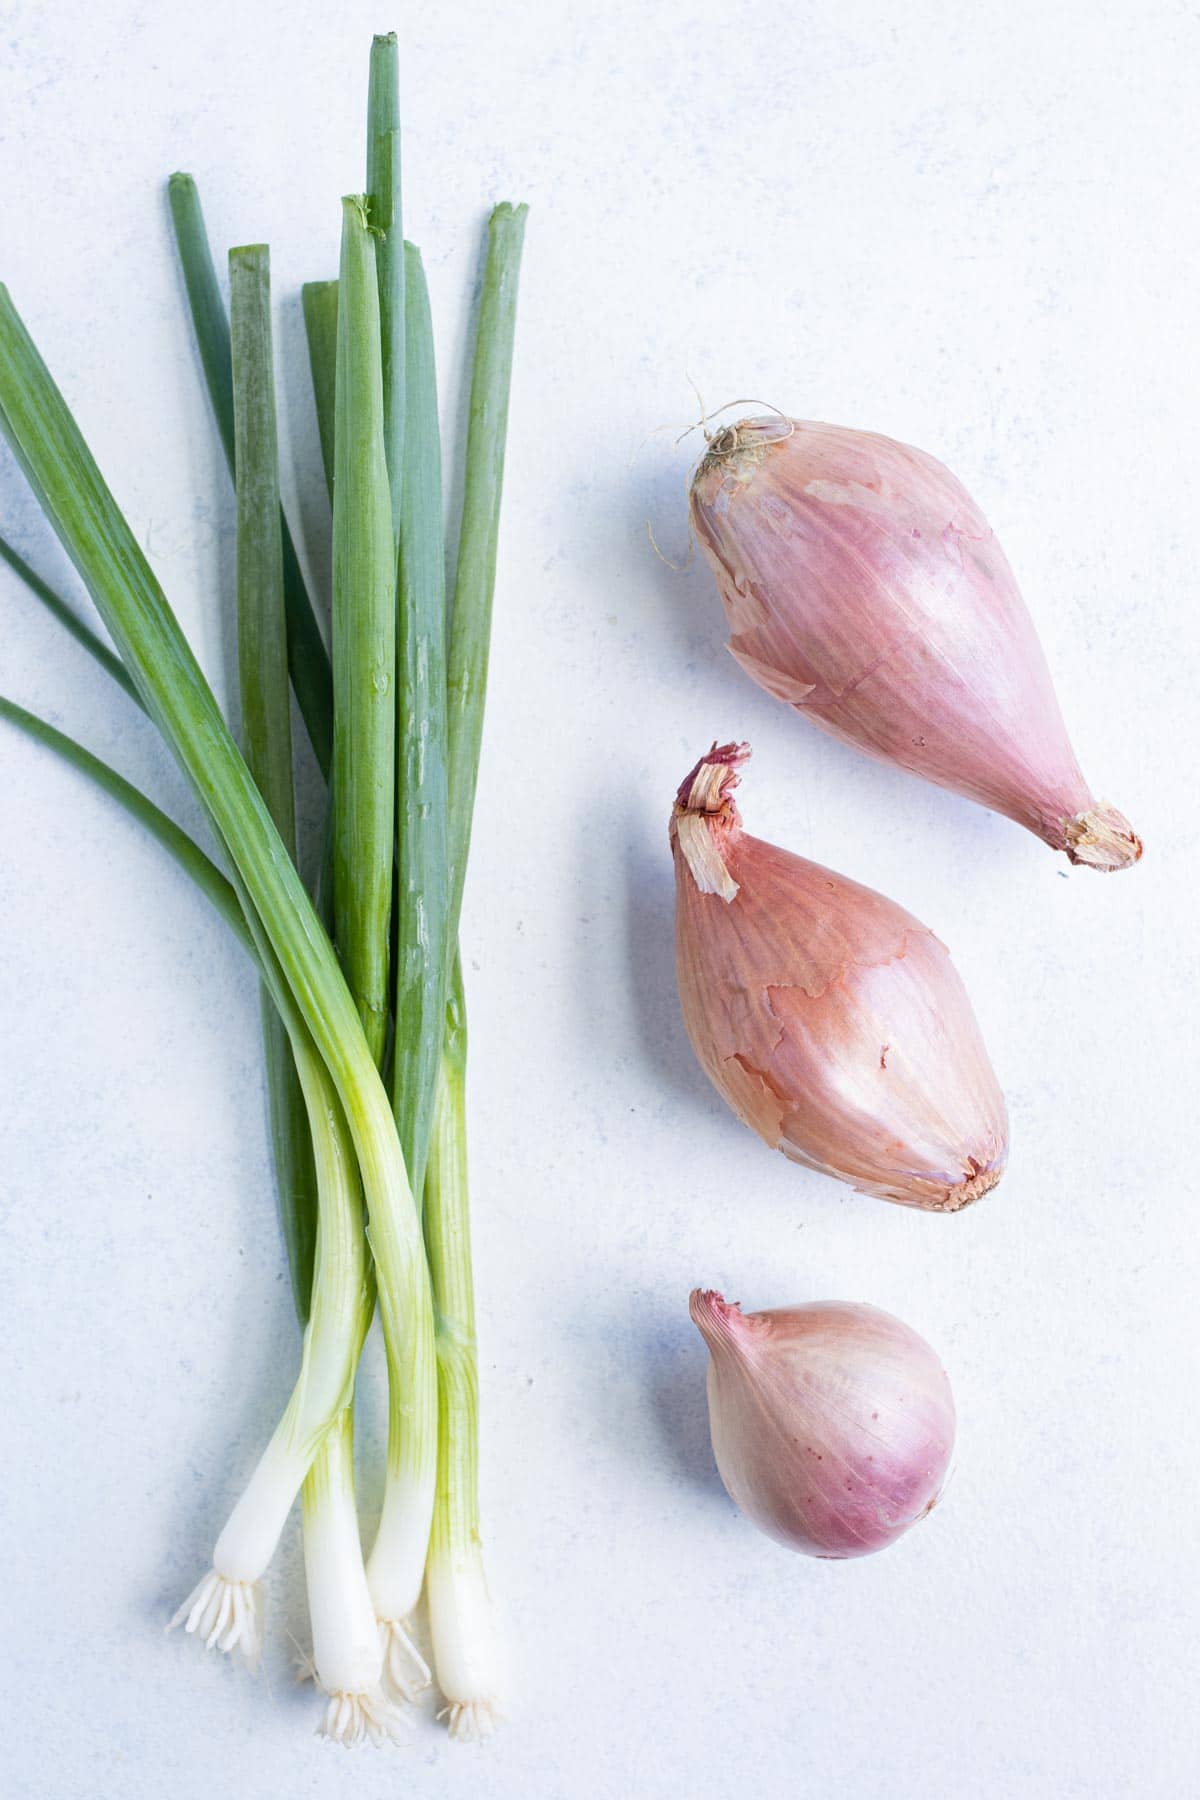 Garlic vs. Shallots: What's the Difference? - Homeground Grill & Bar